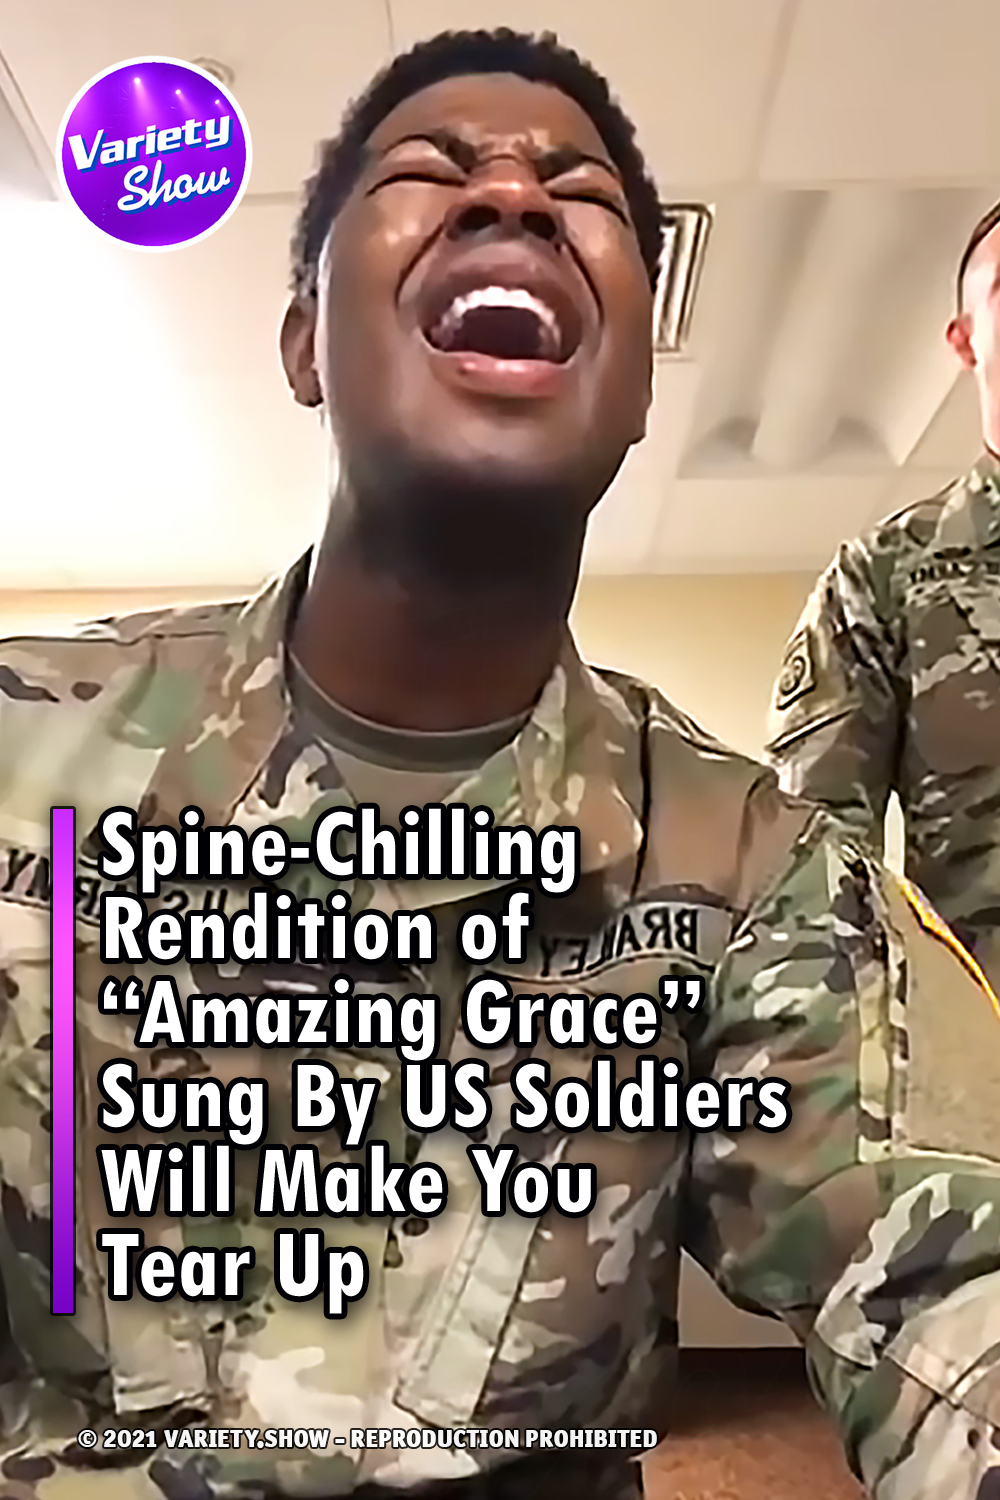 Spine-Chilling Rendition of “Amazing Grace” Sung By US Soldiers Will Make You Tear Up